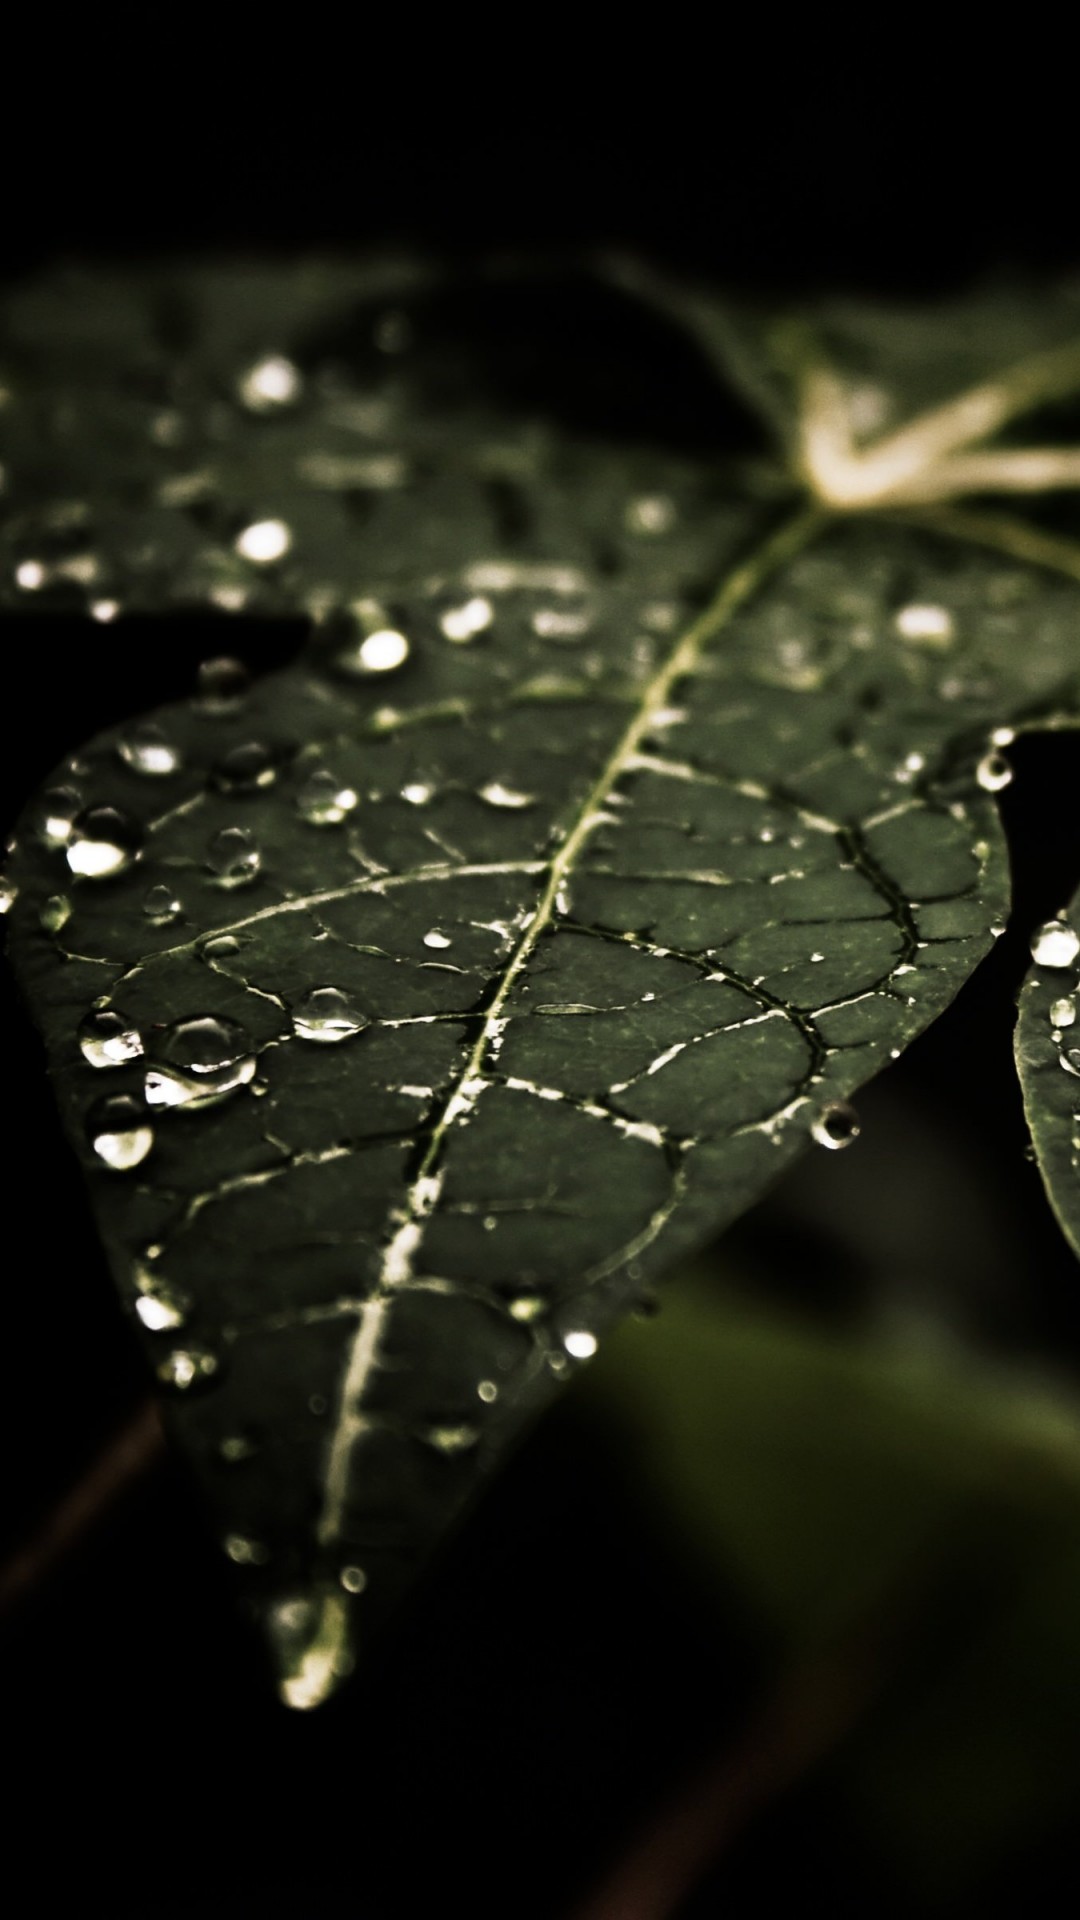 Droplets On Leaves Wallpaper for SAMSUNG Galaxy S4